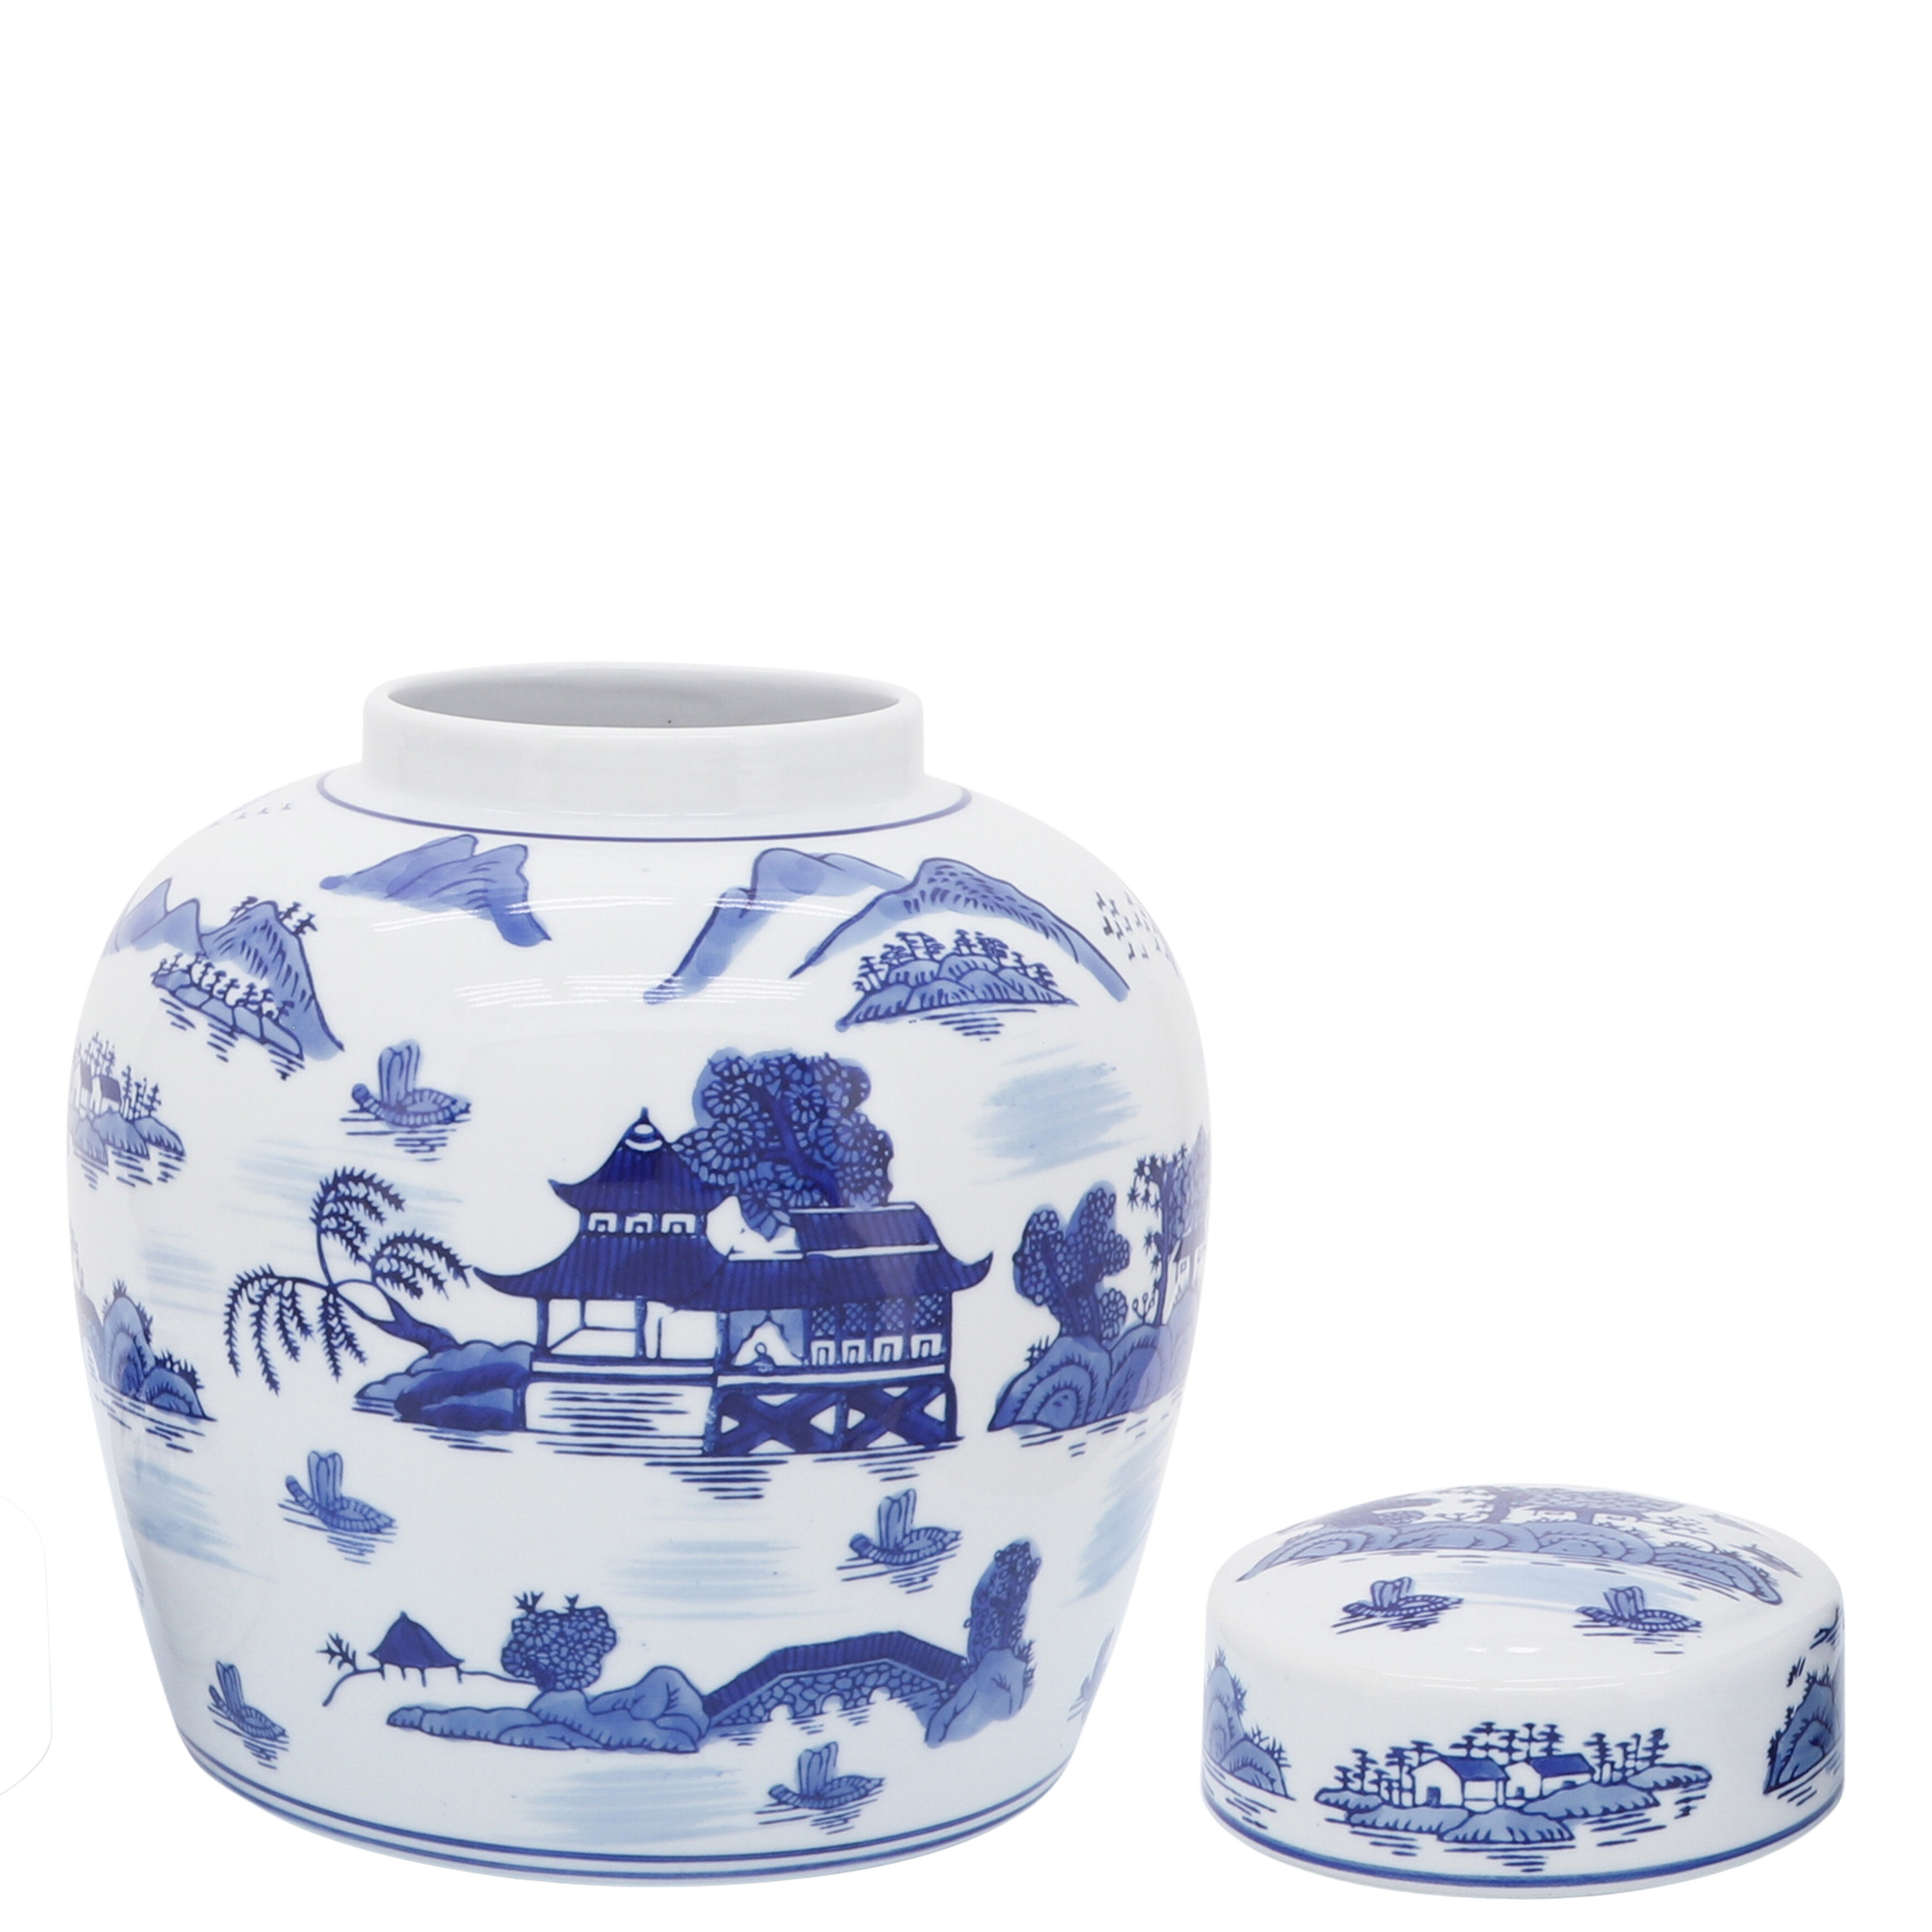 Kelly Clarkson Home Nina 14 Ceramic Temple Jar with Lid - Contemporary  Vintage Style Blue and White Chinoiserie Floral Design & Reviews